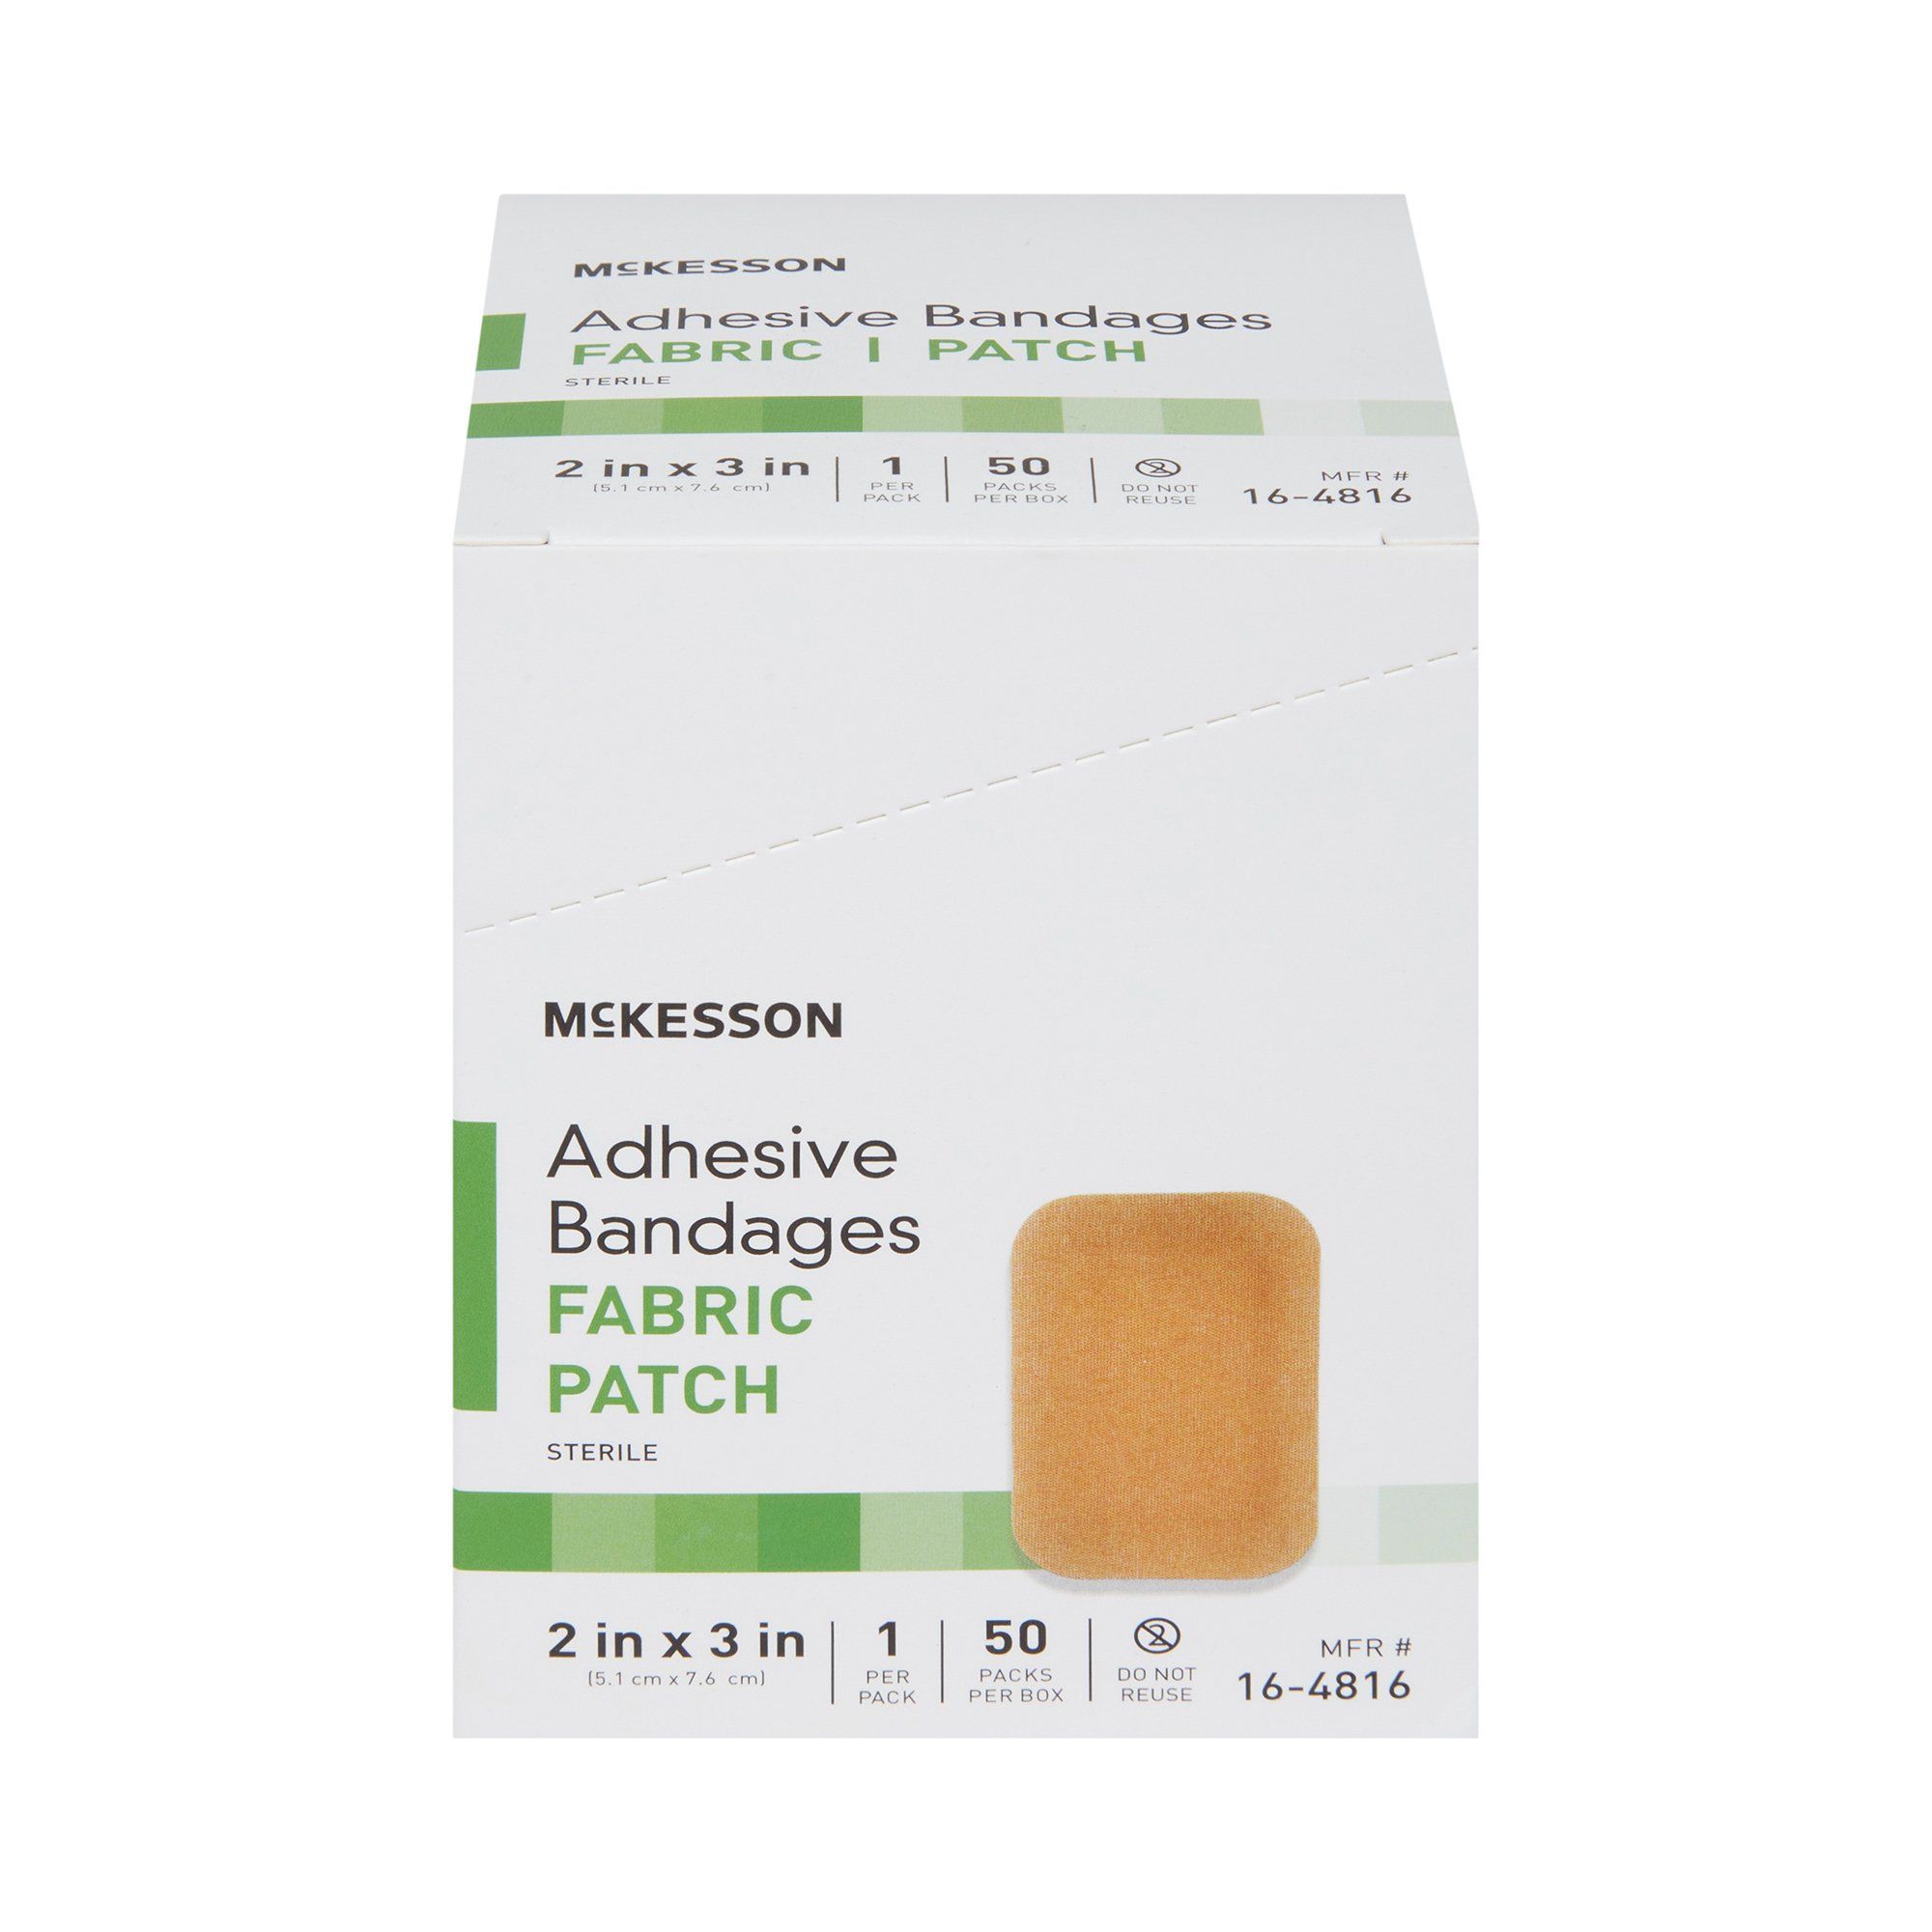 McKesson Adhesive Bandages Fabric Patch, 2" x 3 " - 50 ct